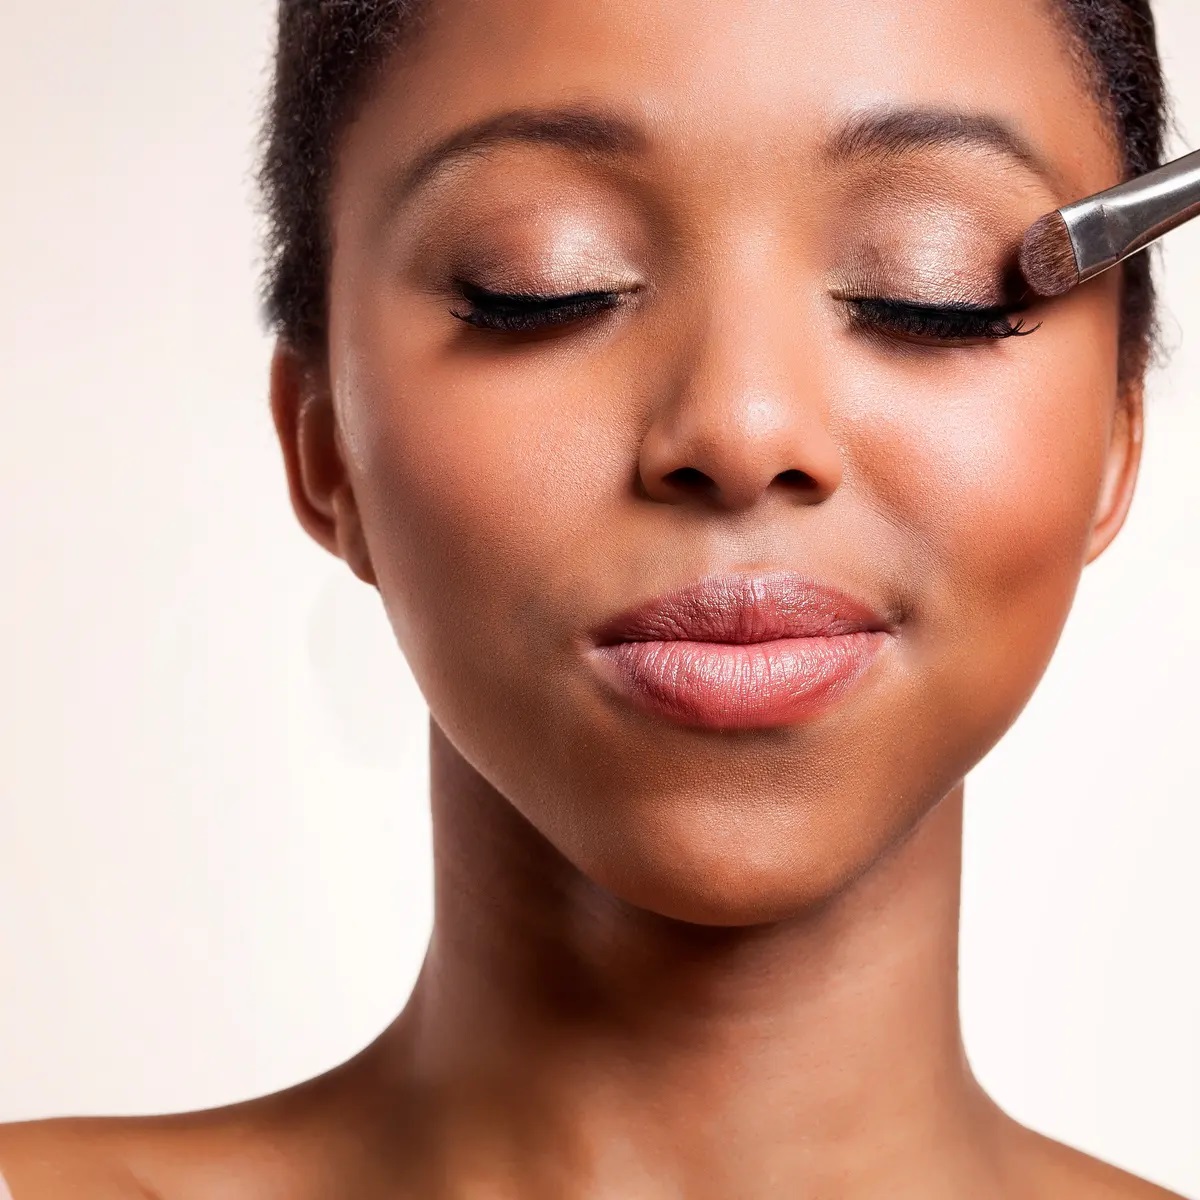 How to Apply Makeup On And Avoid Flaking - Emily CottonTop